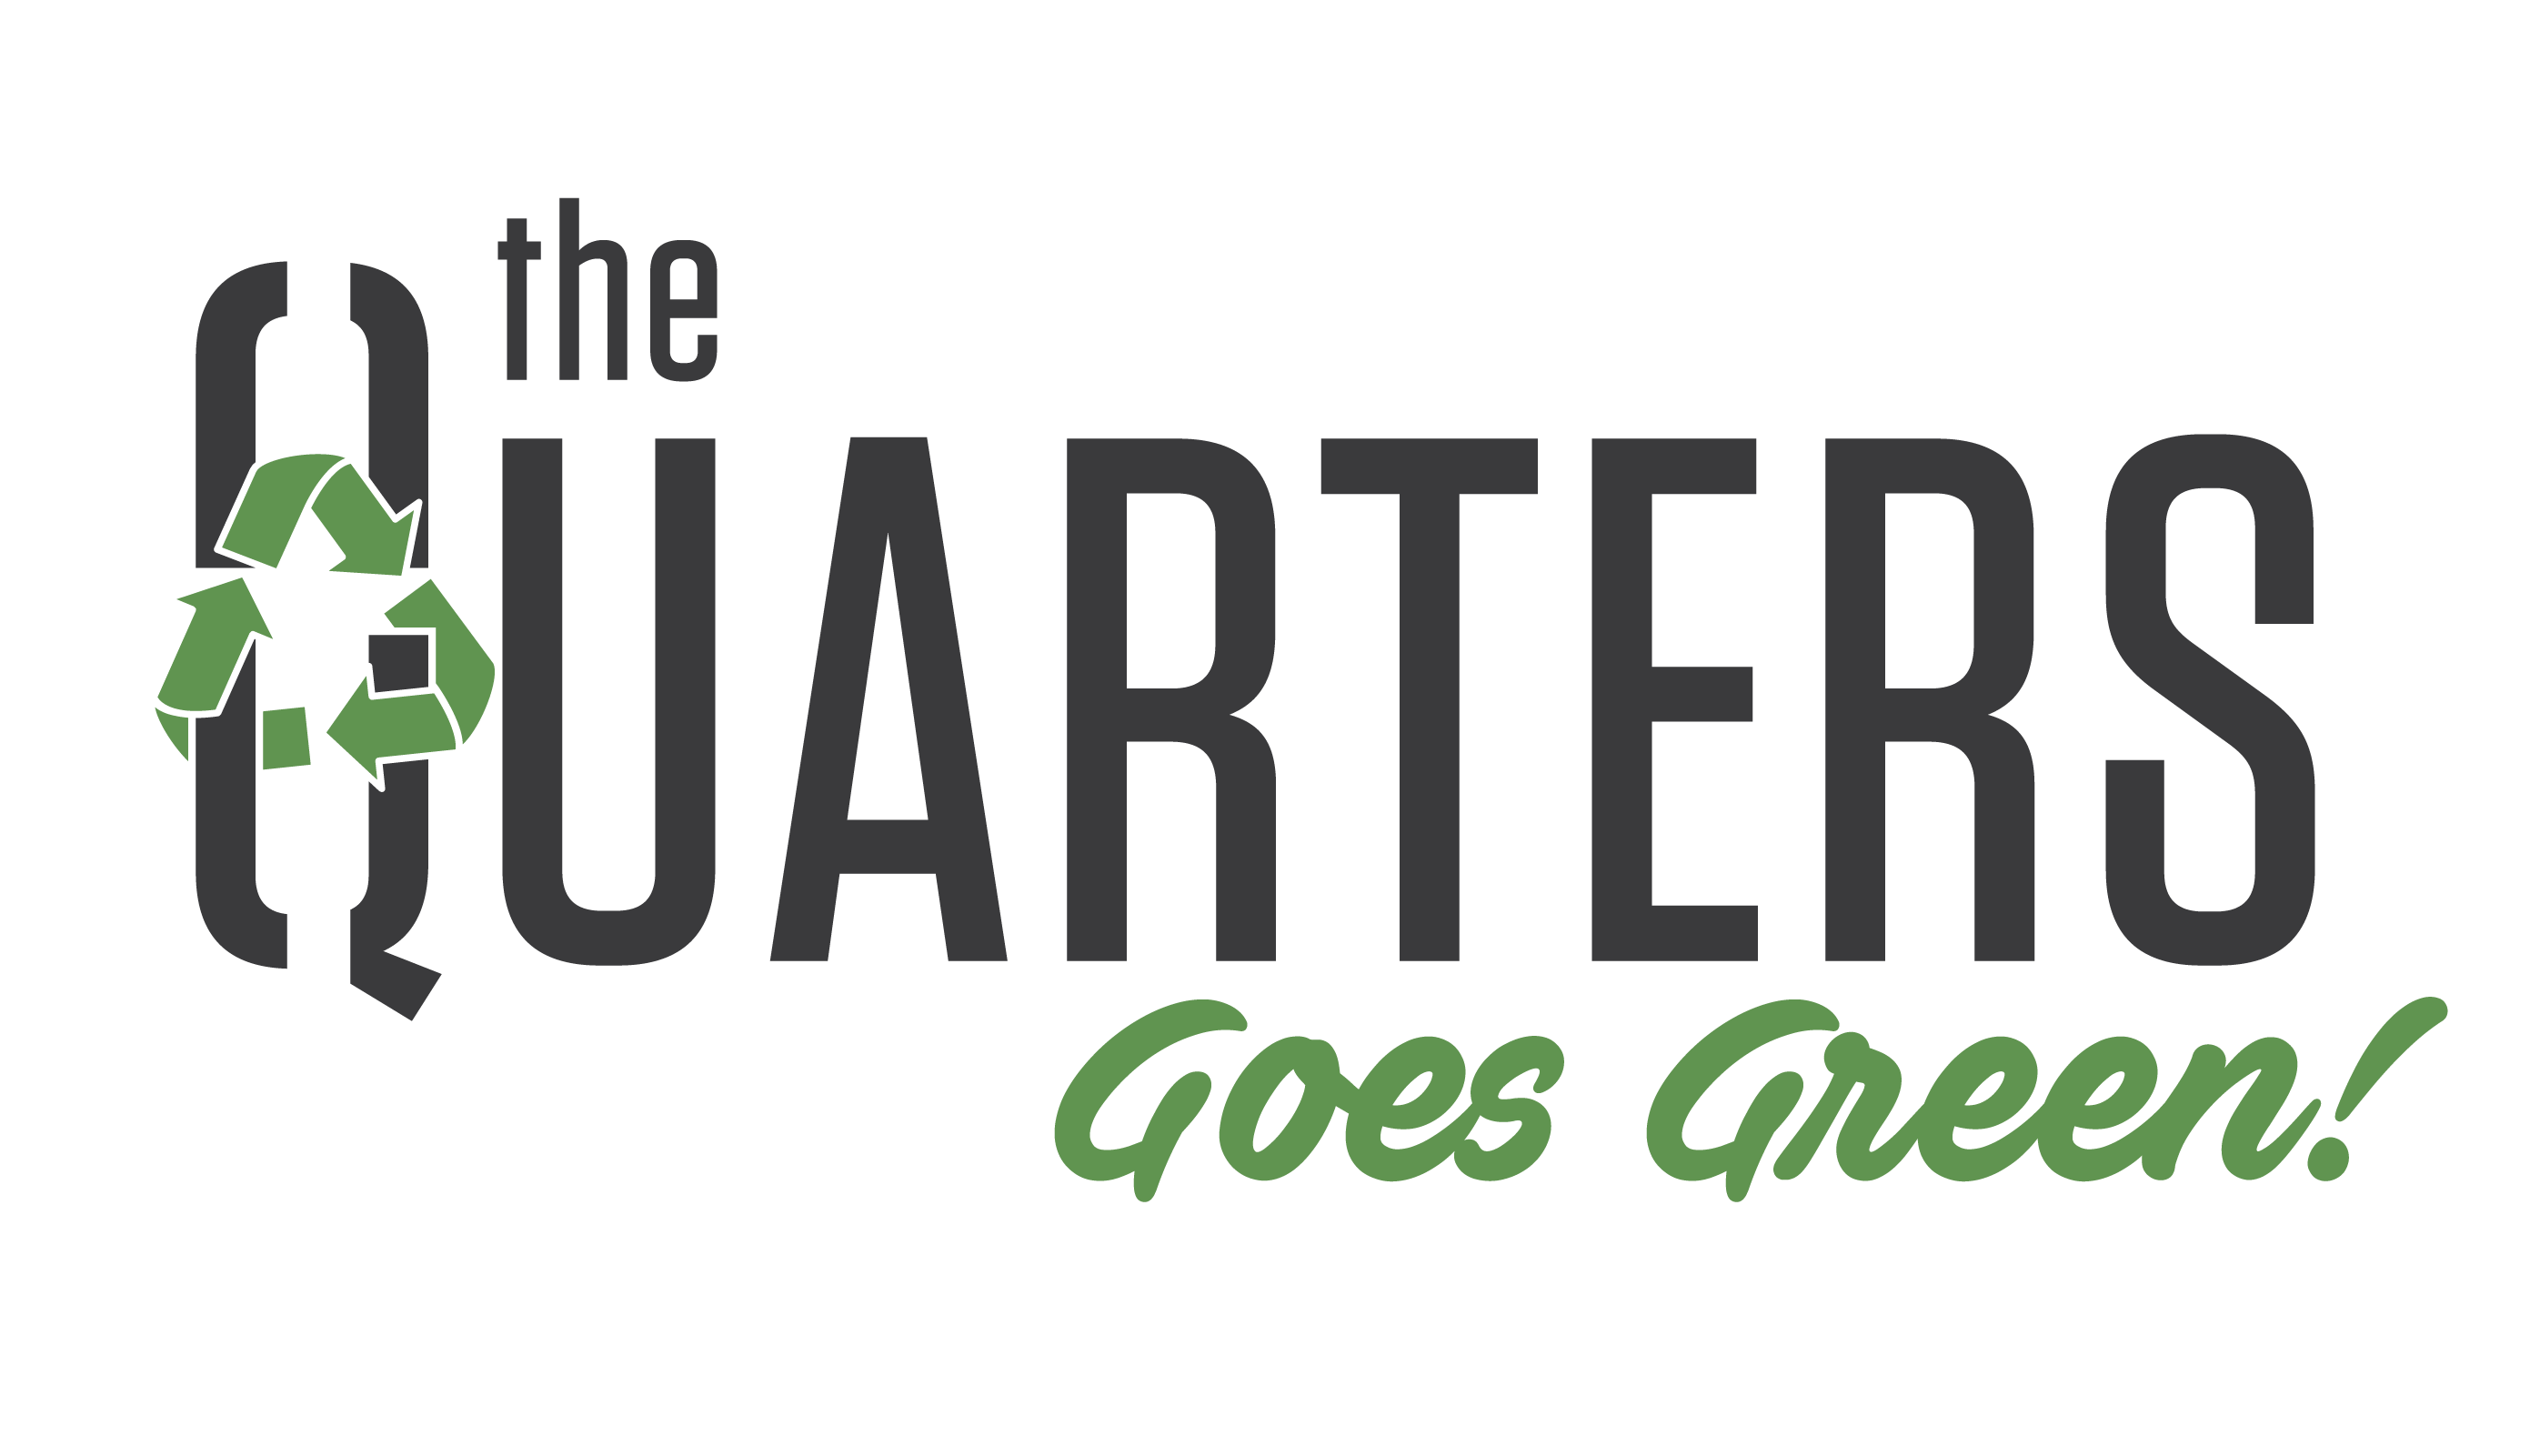 The Quarters Goes Green